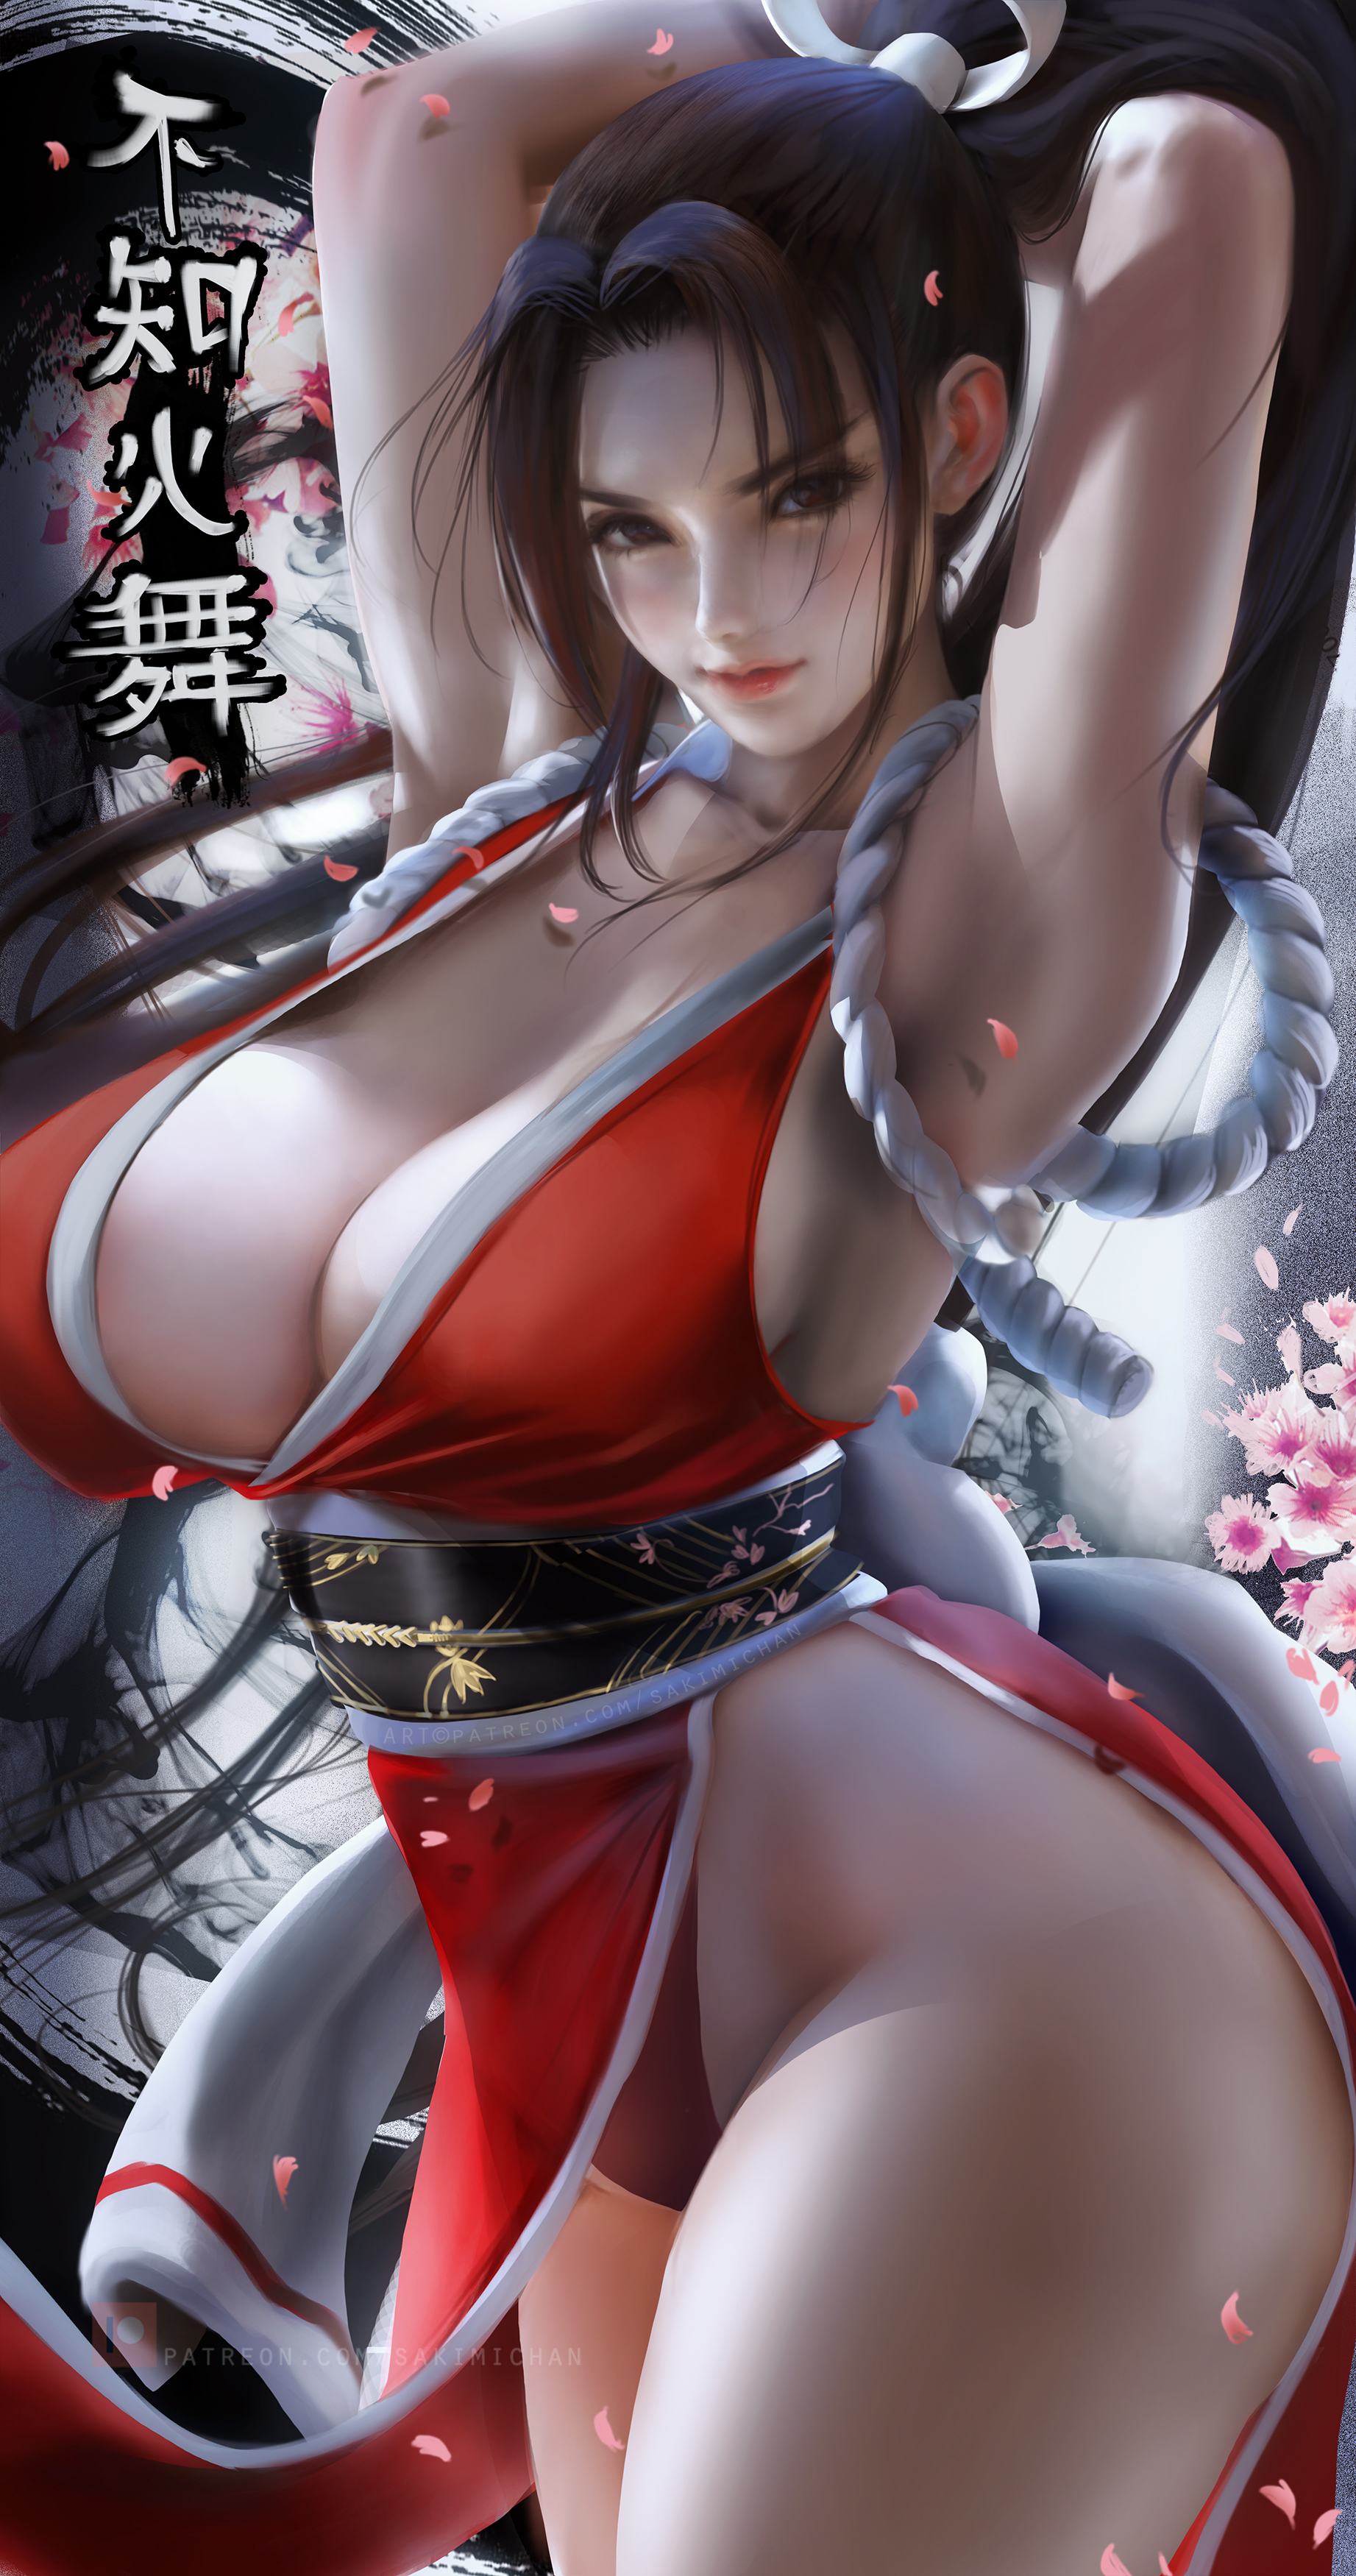 General 1843x3500 fantasy girl Mai Shiranui Fatal Fury King of Fighters SNK video games video game characters brunette ponytail long hair dark hair curvy thighs illustration Sakimichan Kunoichi cleavage big boobs thick thigh looking at viewer portrait display artwork drawing digital art fan art